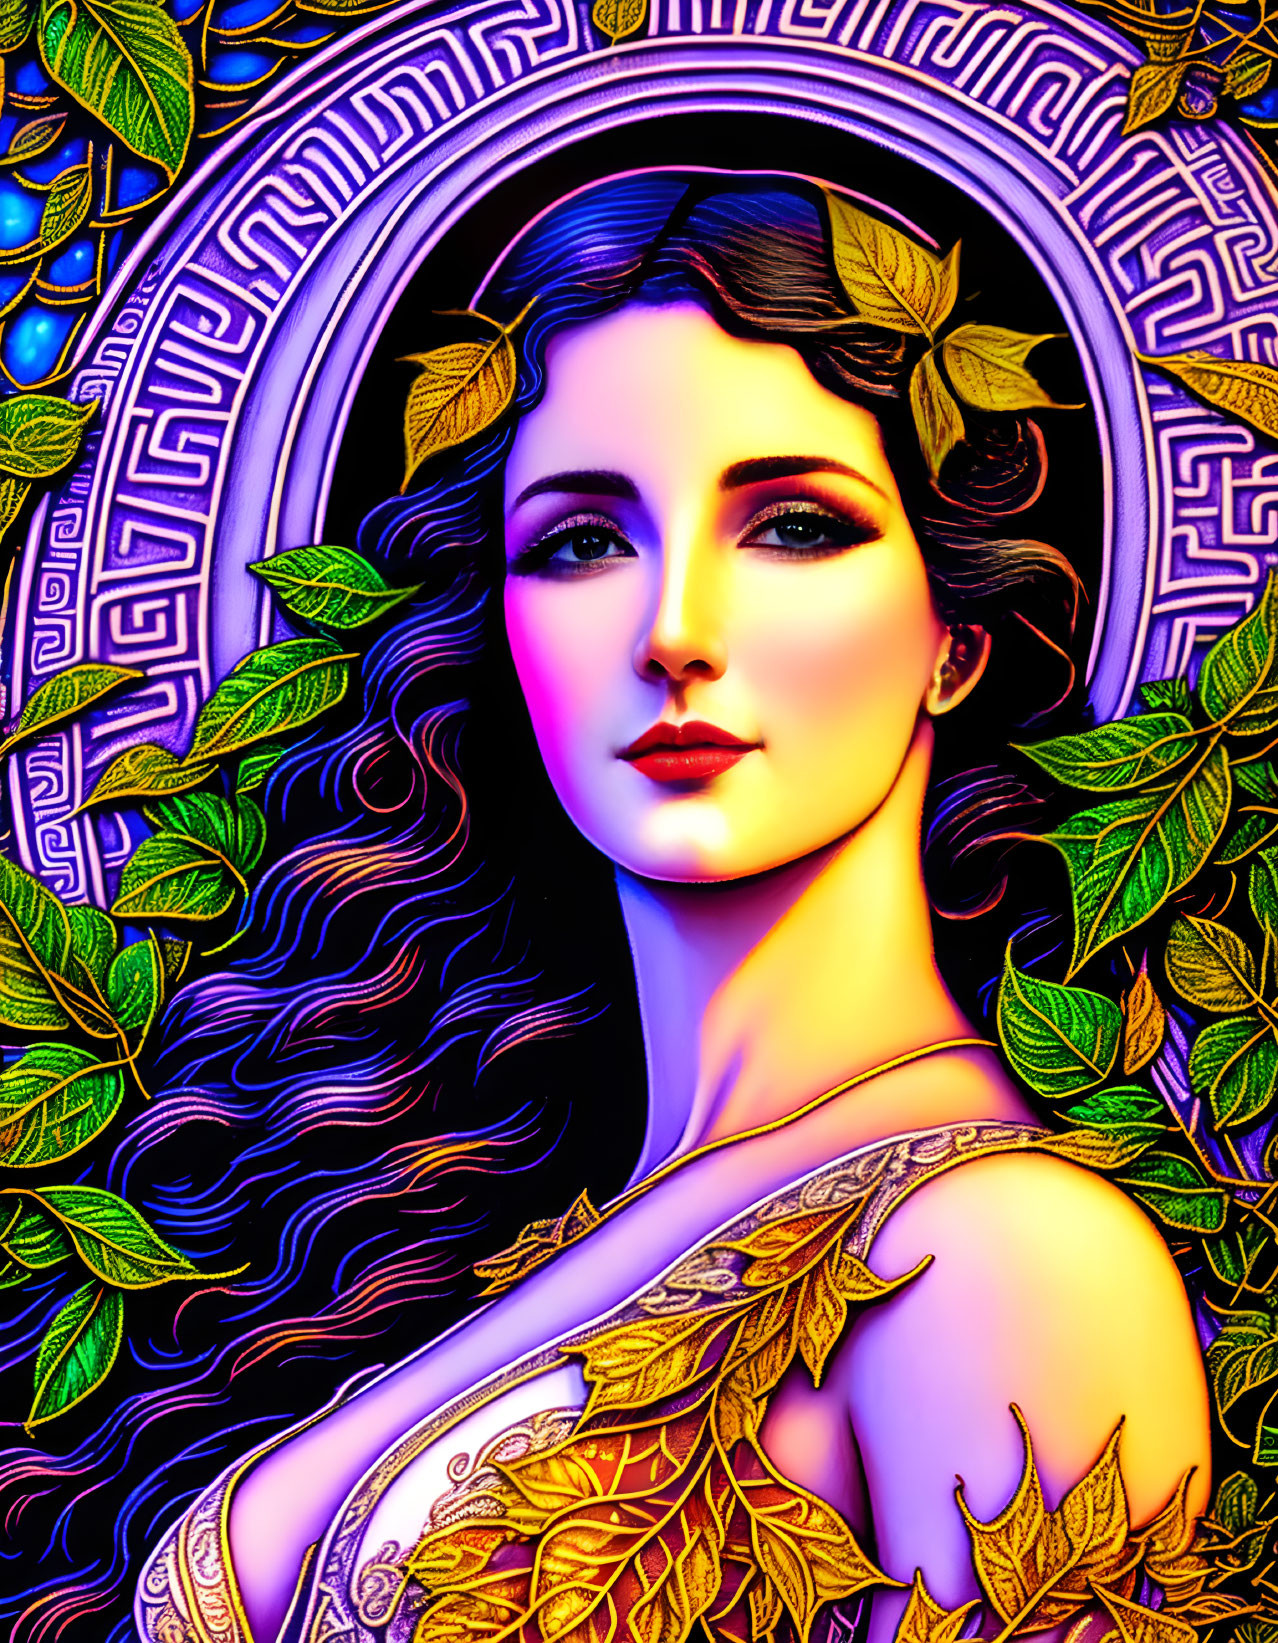 Colorful Art Nouveau Woman Illustration with Intricate Patterns